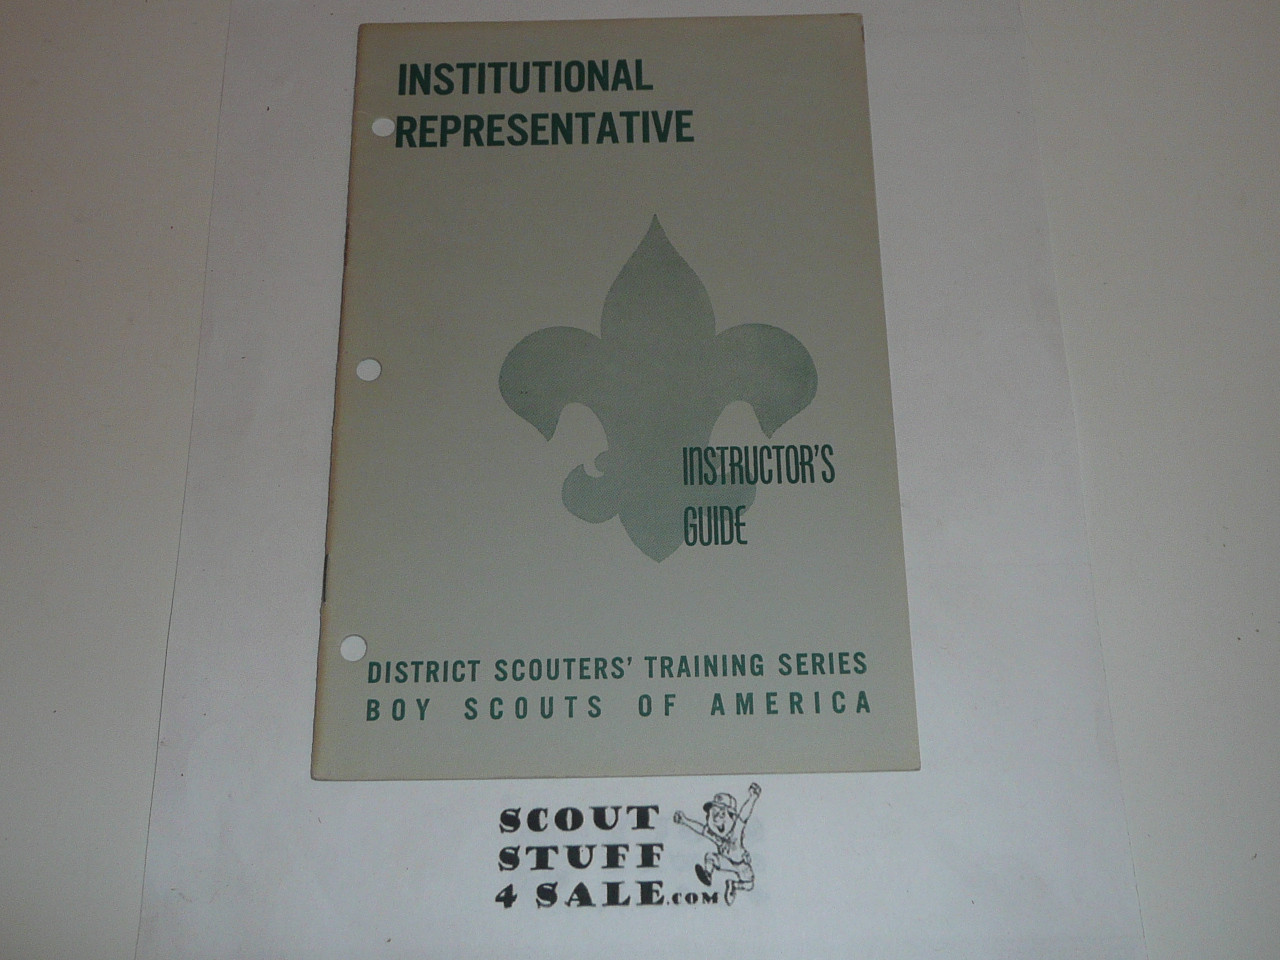 District Scouter's Training Series, Institutional Representitive Instructor's Guide, 8-57 printing